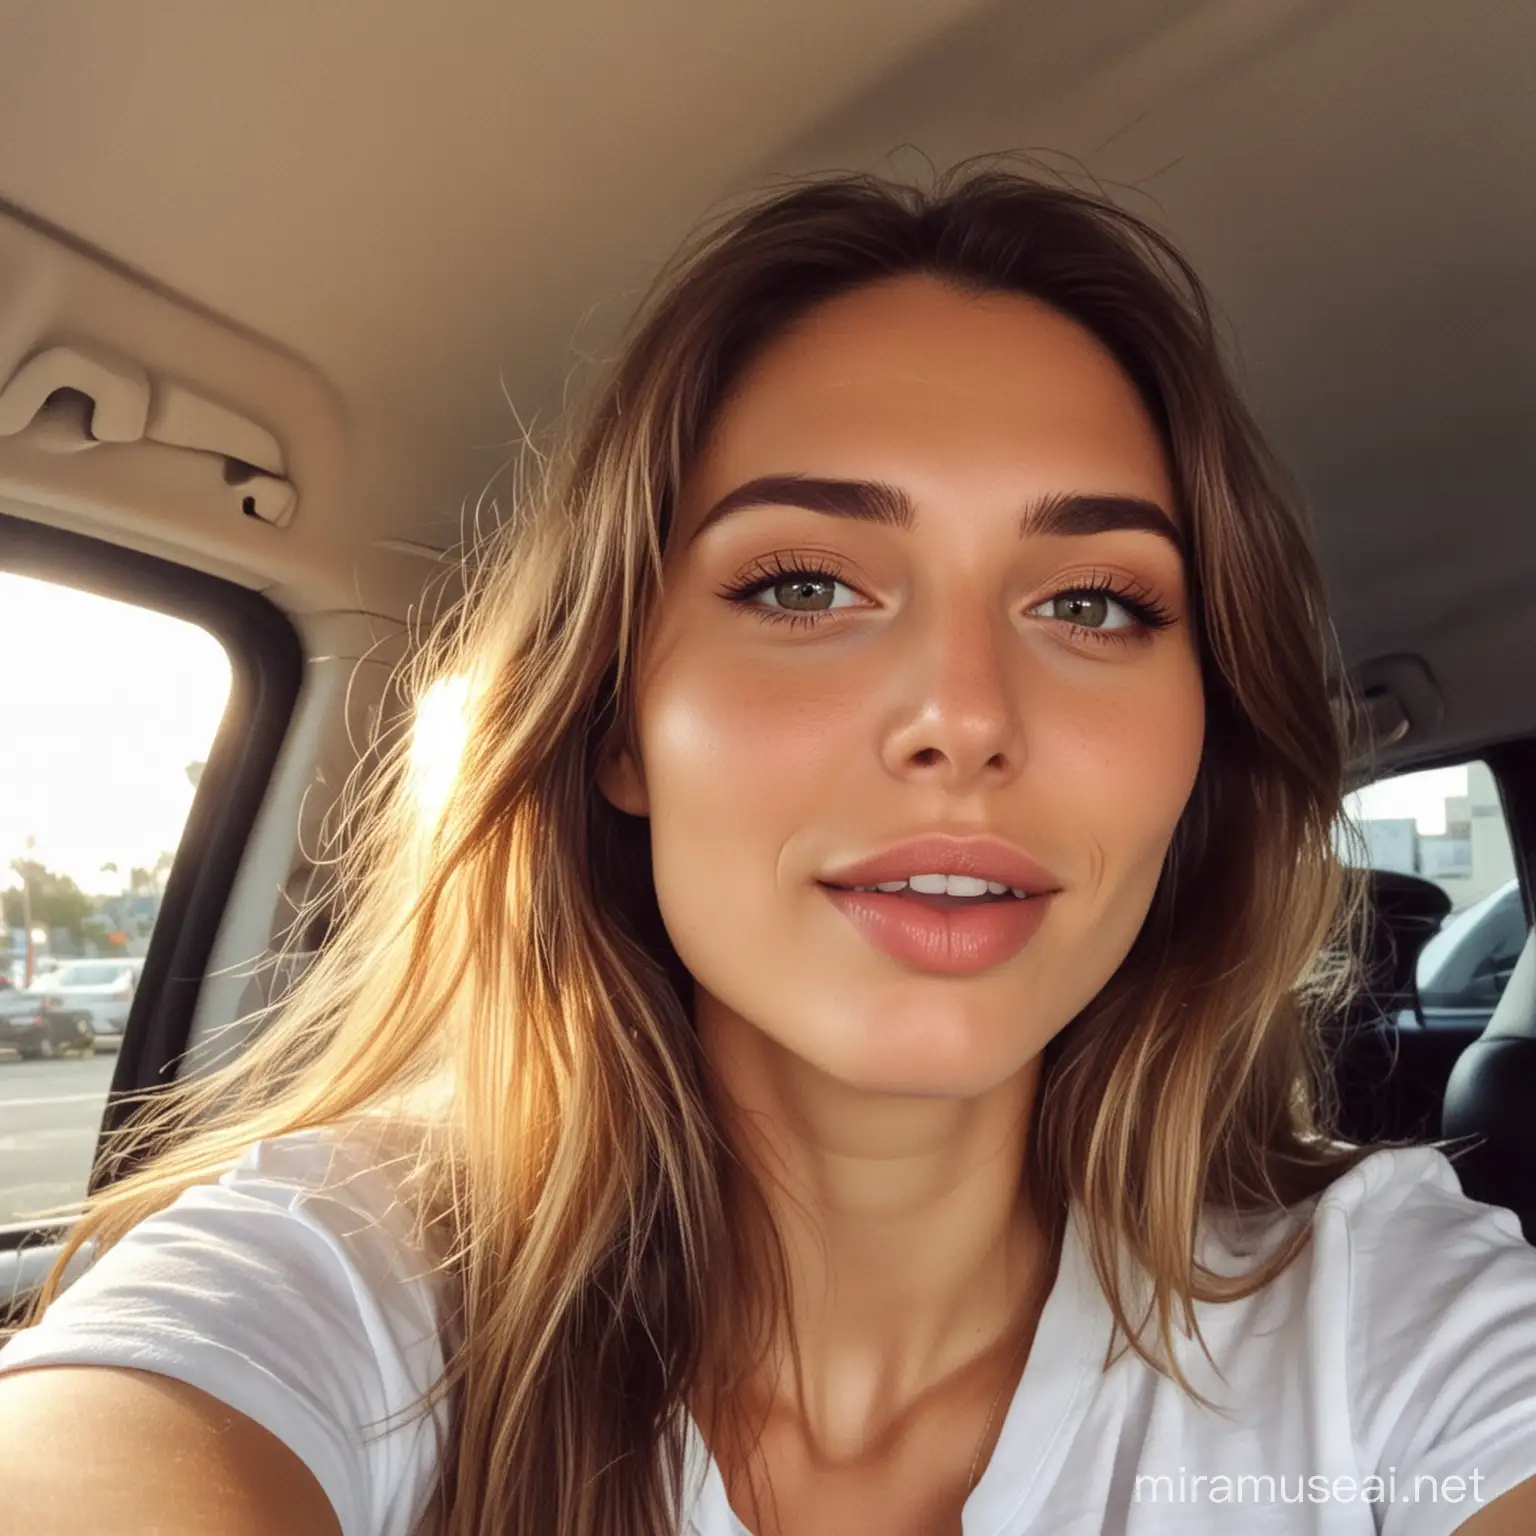 a handsme men with long hair, wearing jeans and an oversized white t-shirt sits in the back seat of her car taking selfie, the woman has light makeup on her face, she is blowing a kiss to camera, perfect symmetric eyes, the sun shines through the window onto his head, photo taken from inside the vehicle